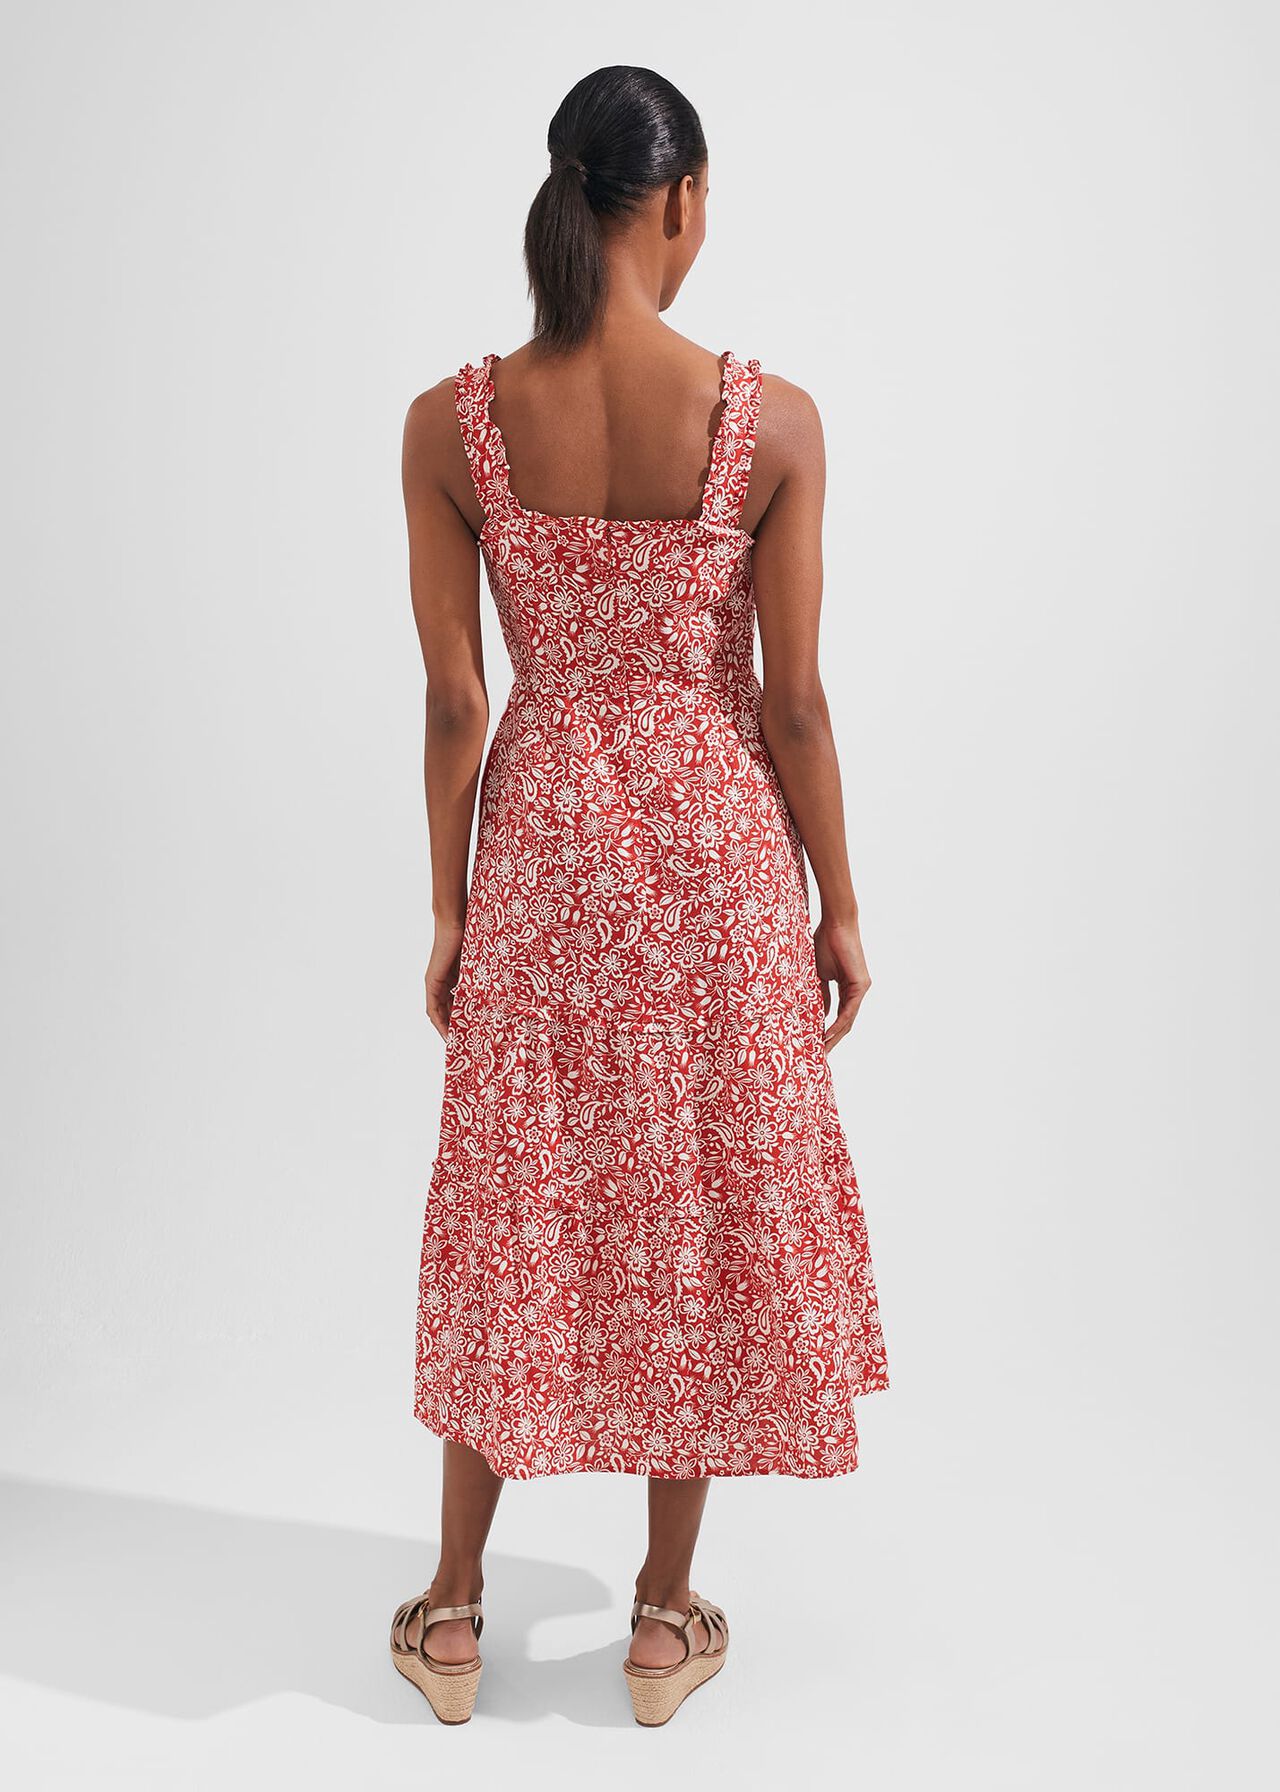 Tabitha Dress, Clay Red Ivory, hi-res